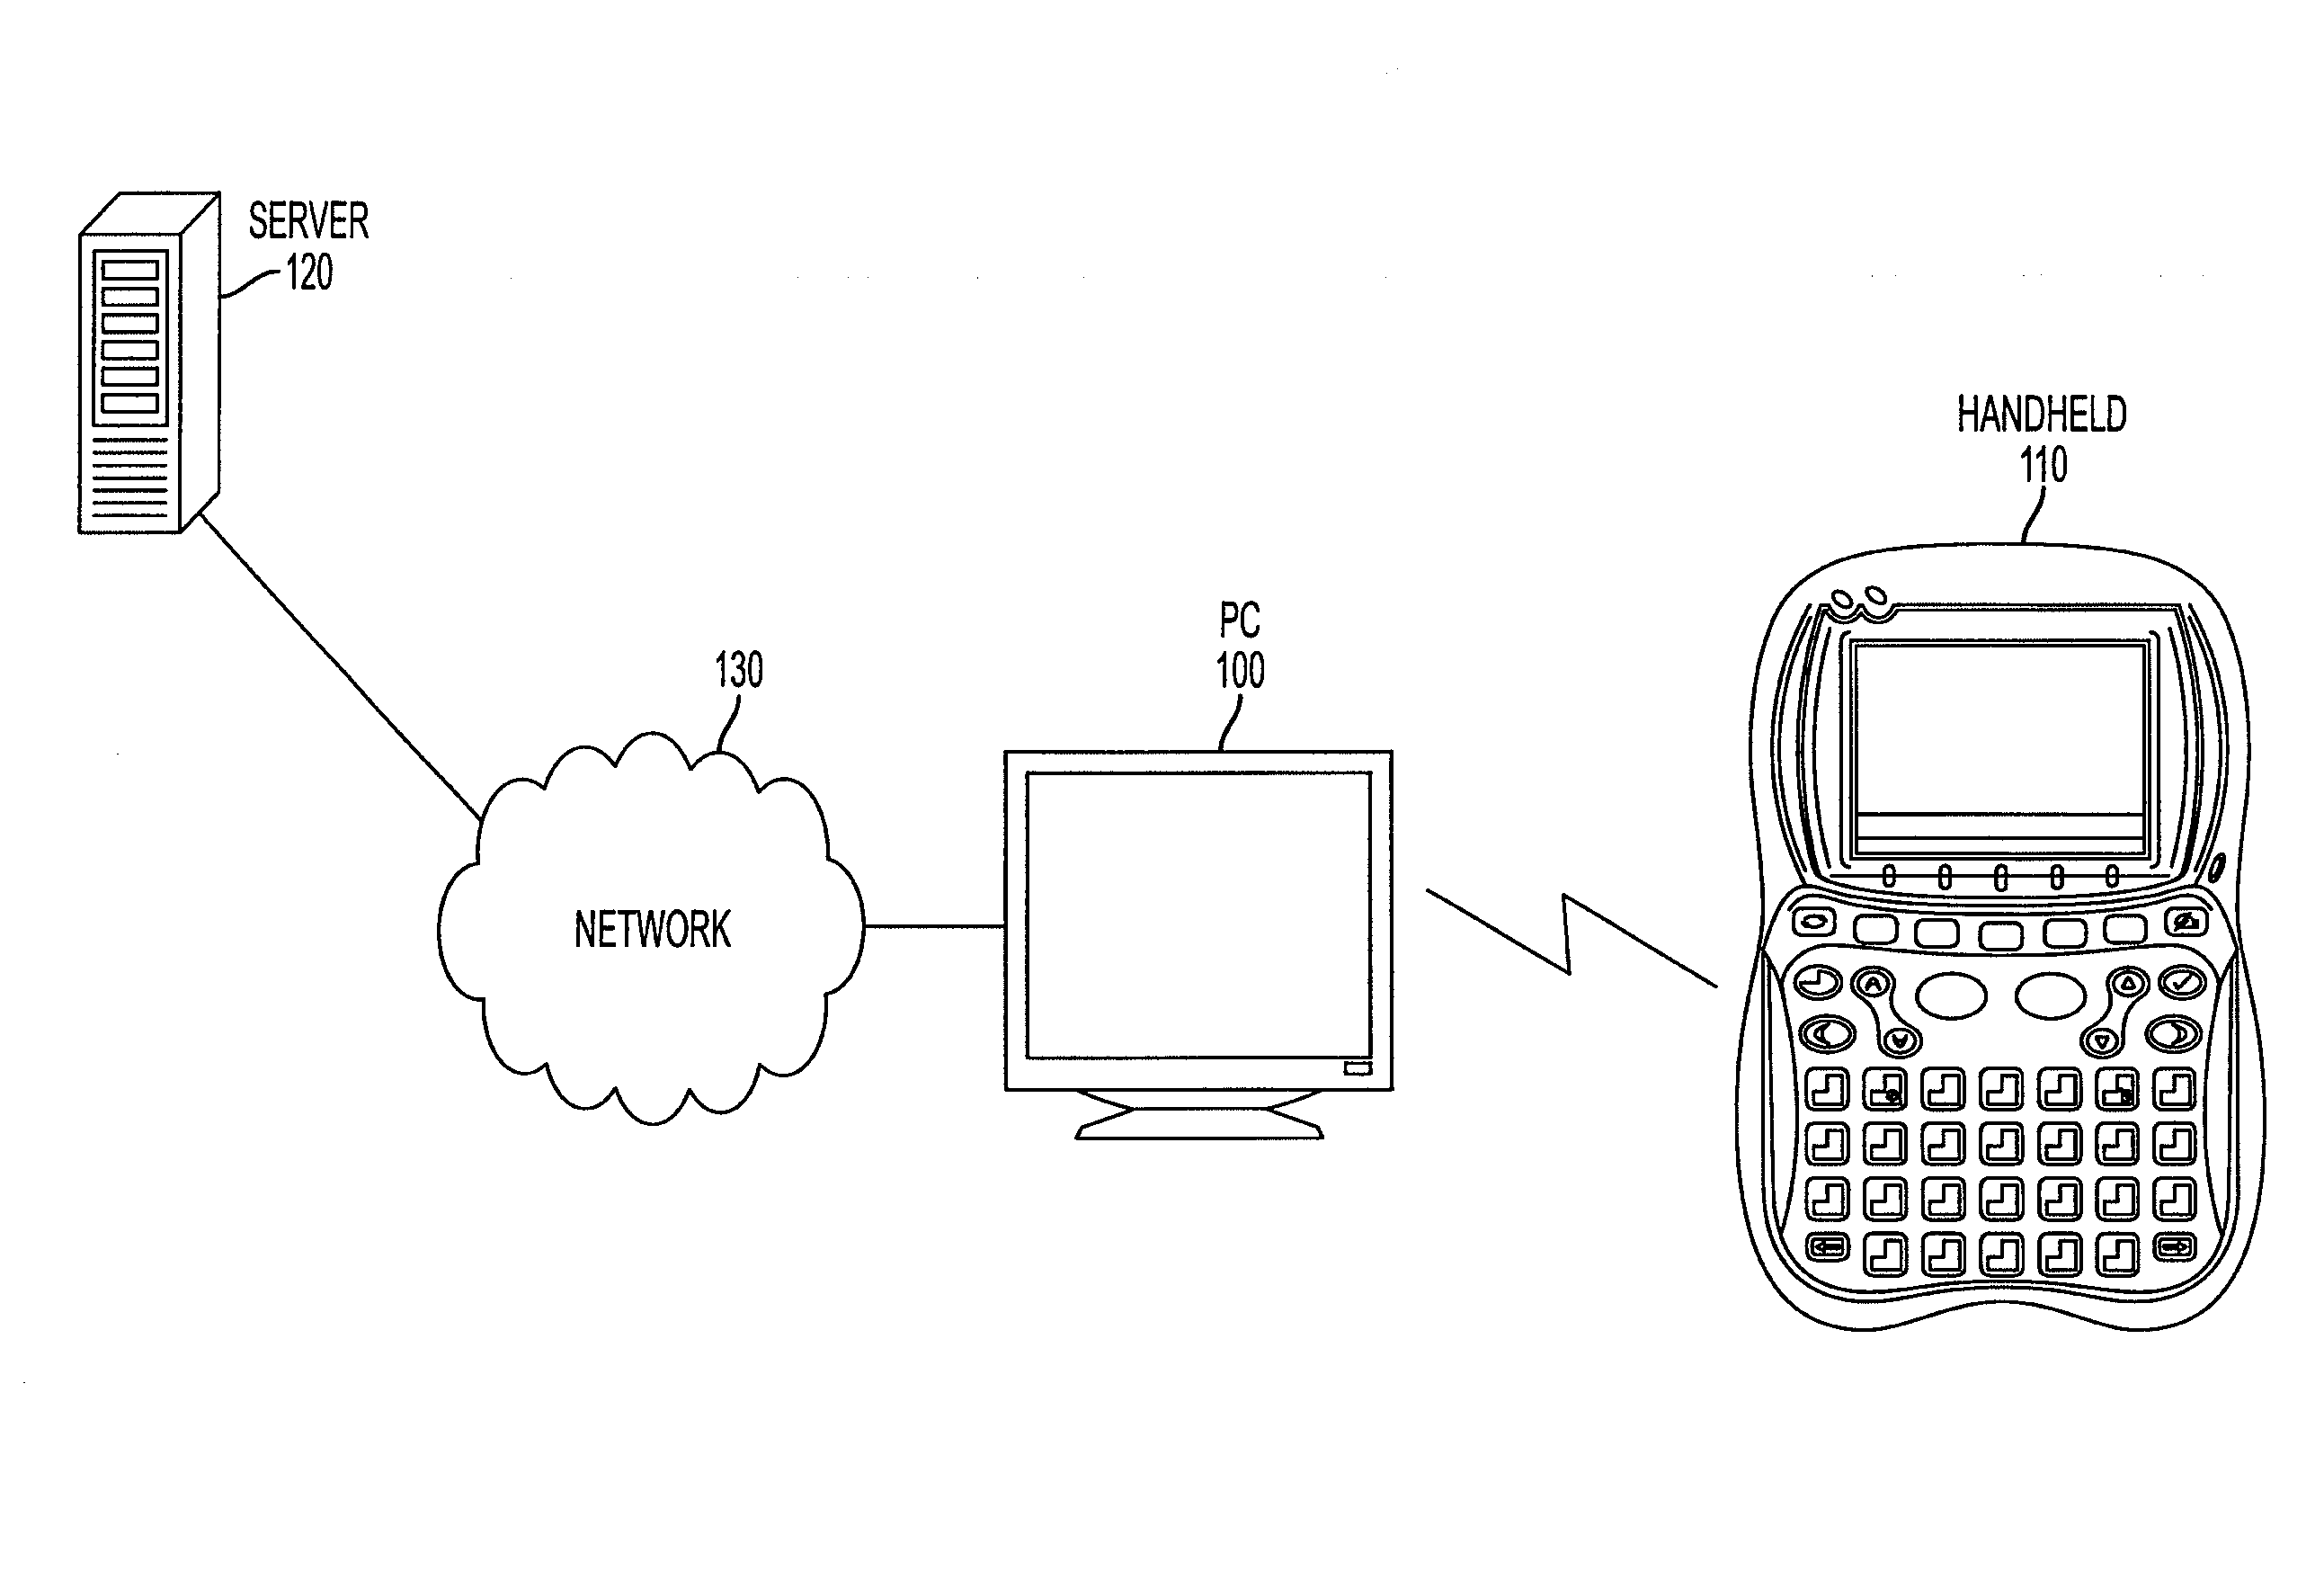 Systems and methods for improving user efficiency with handheld devices